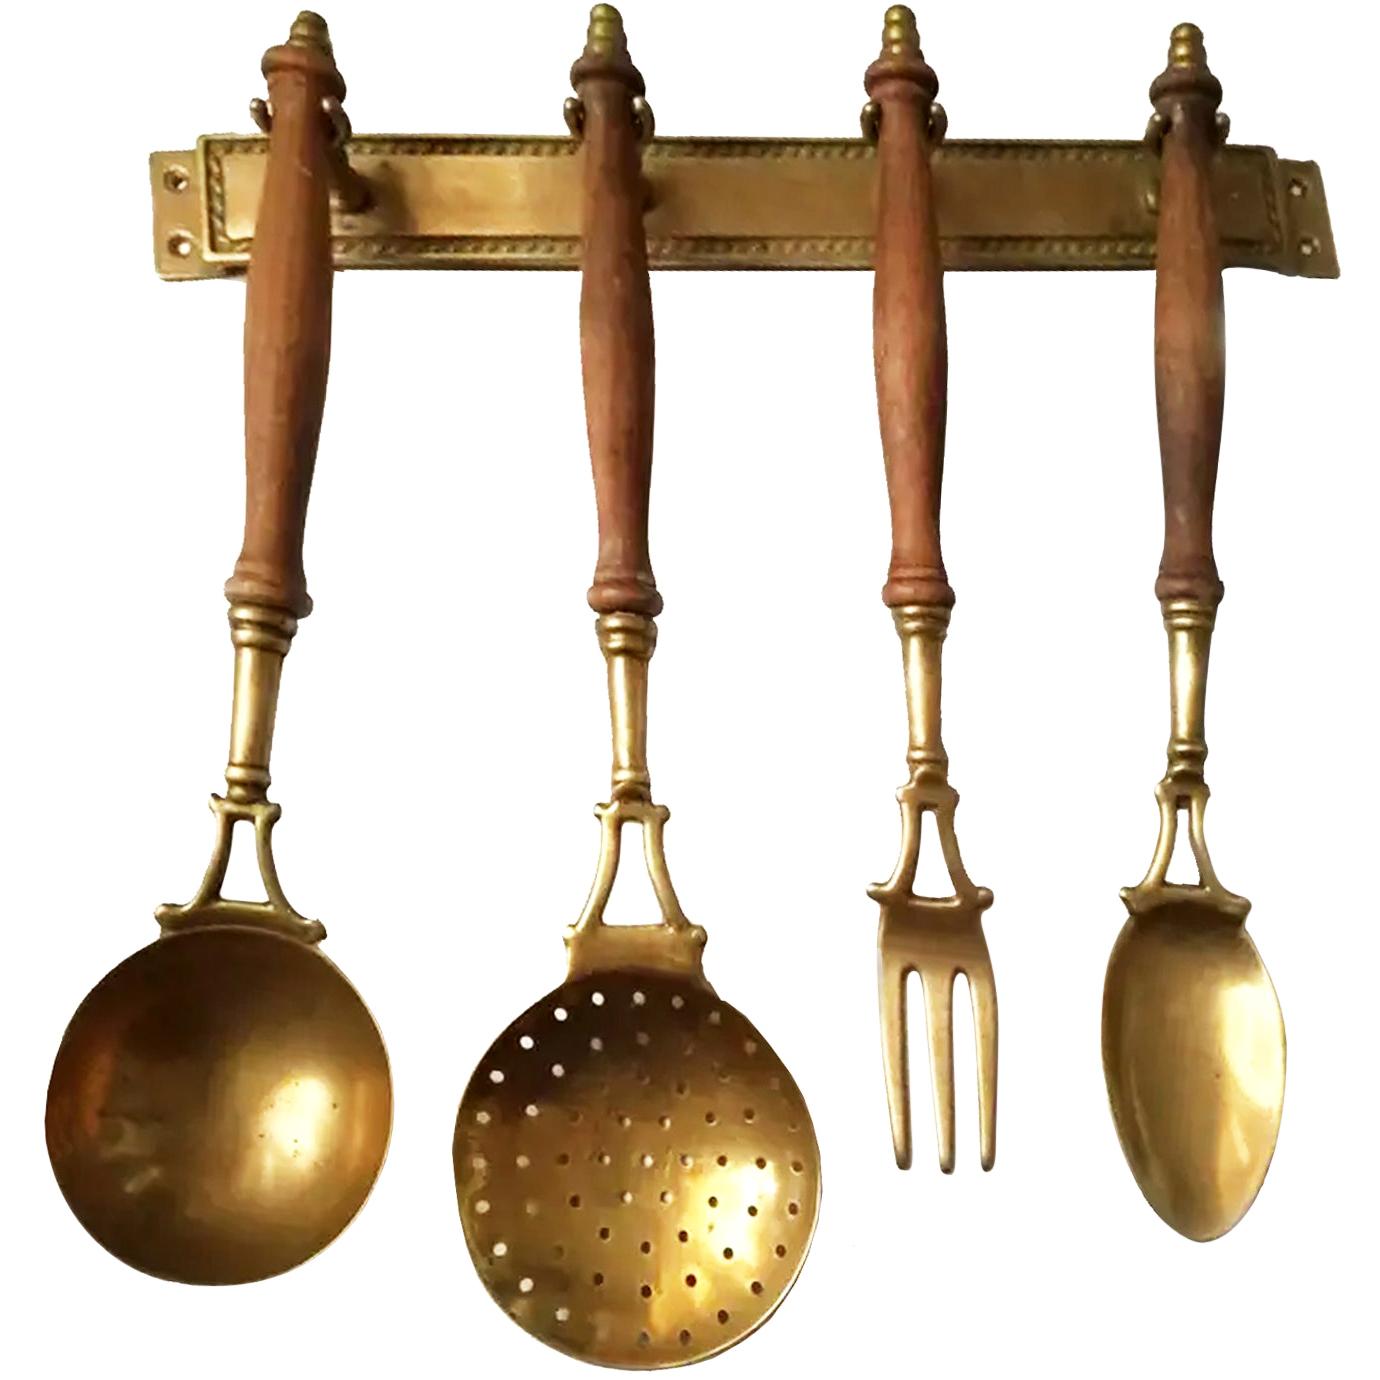 Only until the end of the year
Reasonable offers are welcome

Old kitchen tools or utensils made of brass and wood hanging from a hanging bar. Old Kitchen Appliances

Early 20th century

Saucepan fork palette and serving pot

This set of brass